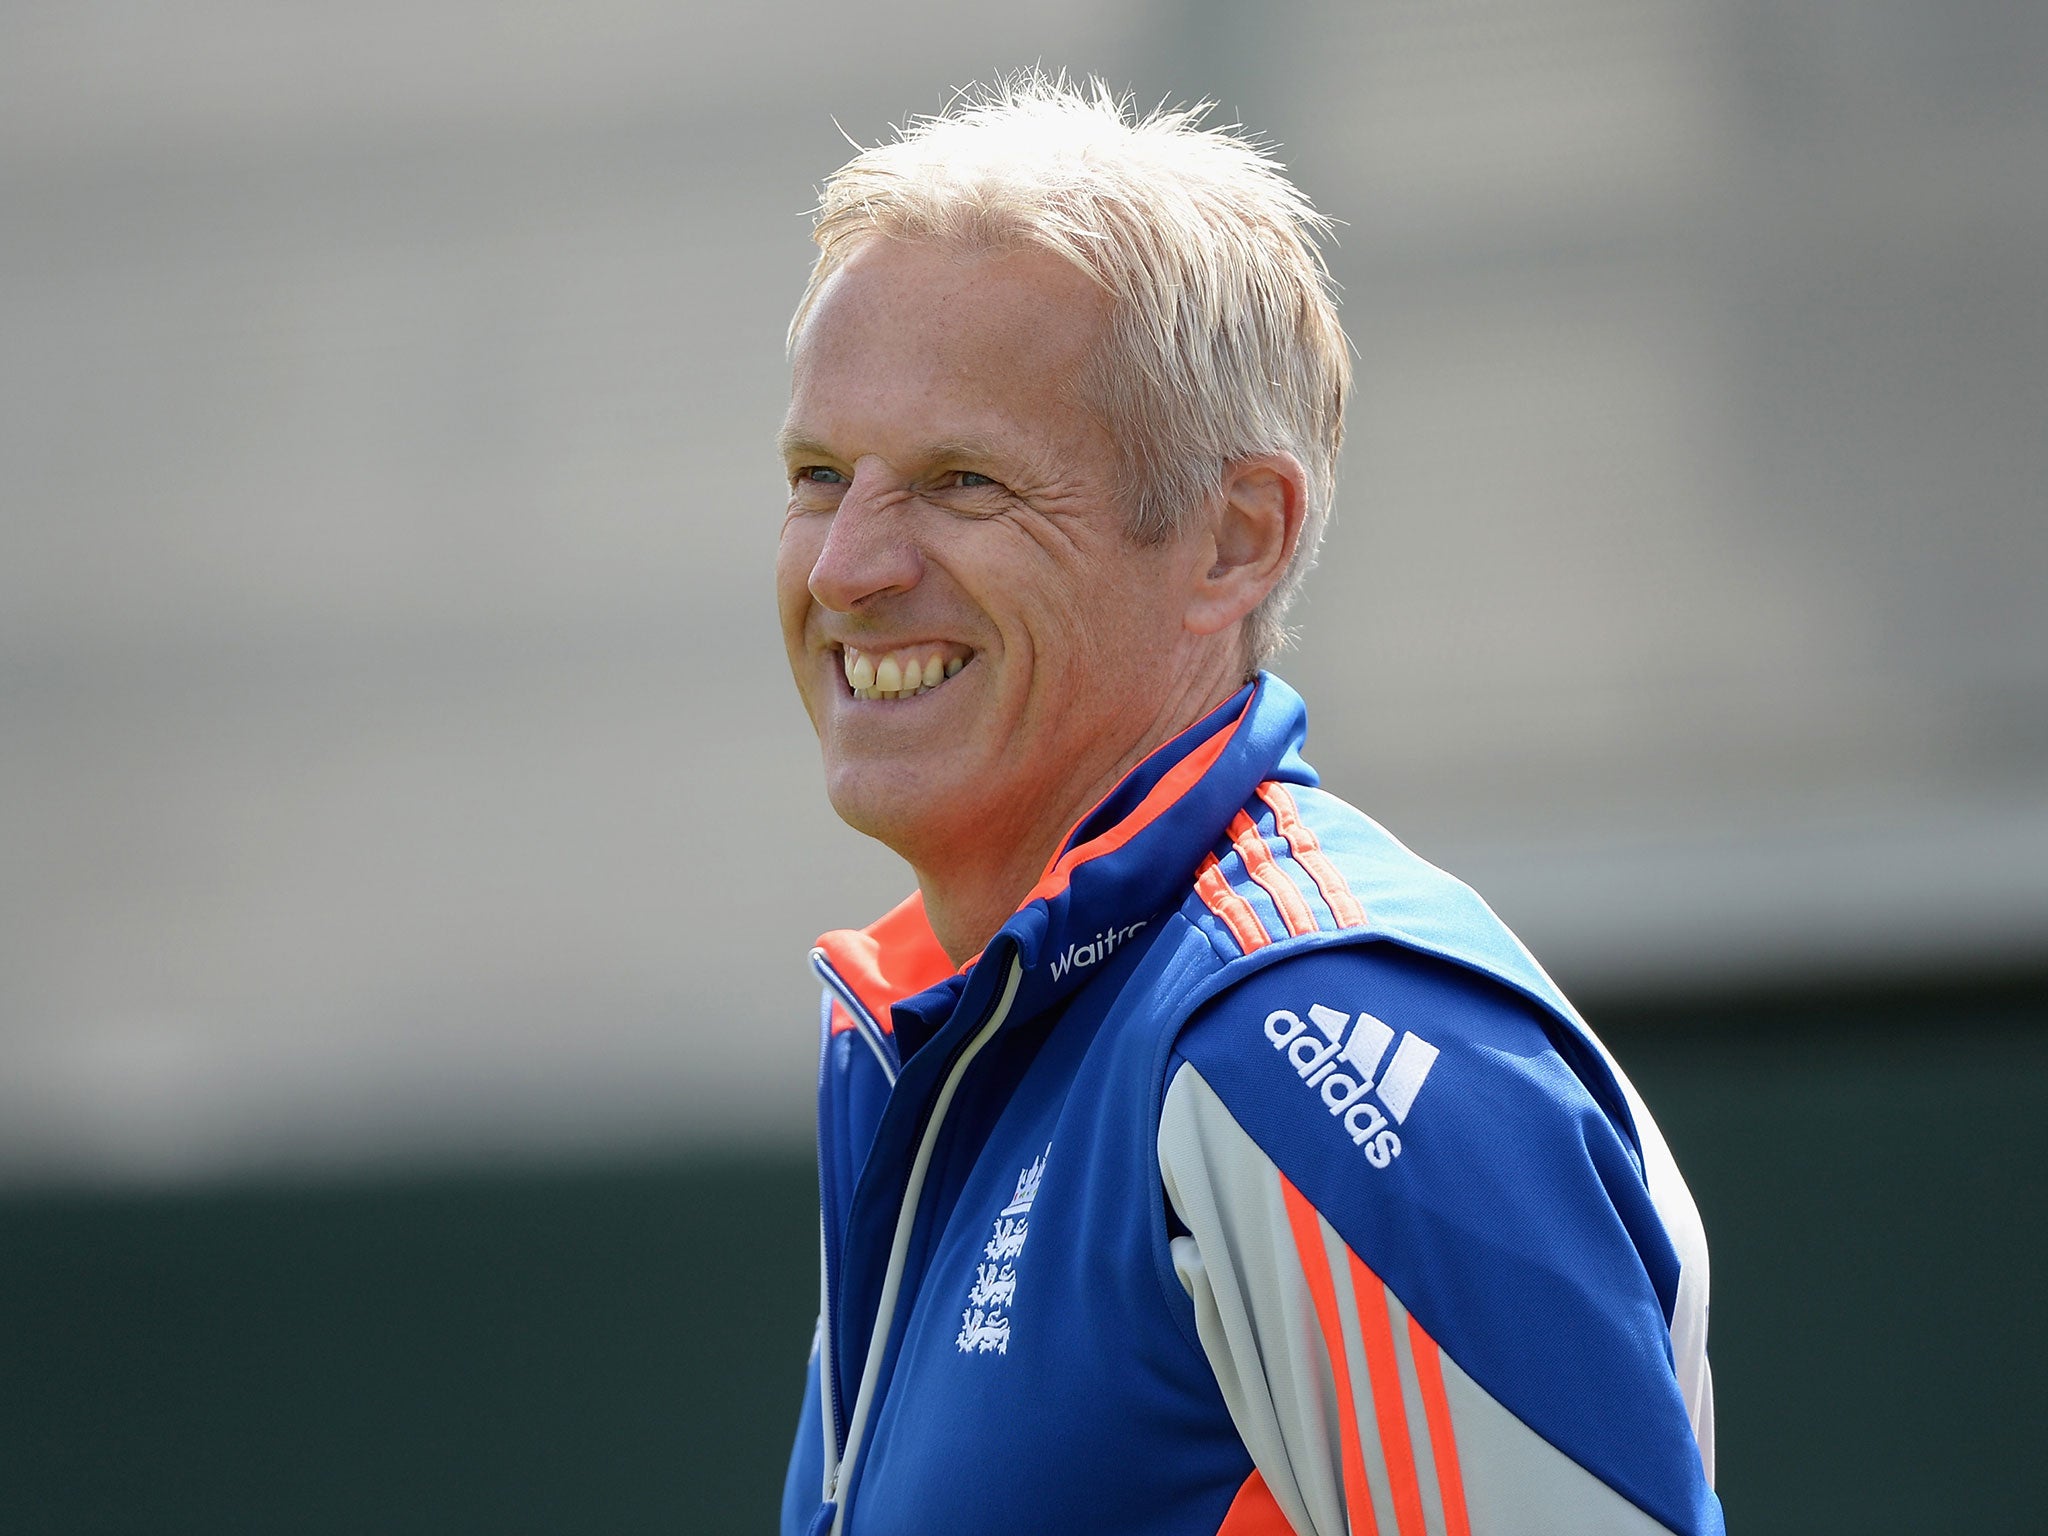 England head coach Peter Moores looks sets to be sacked